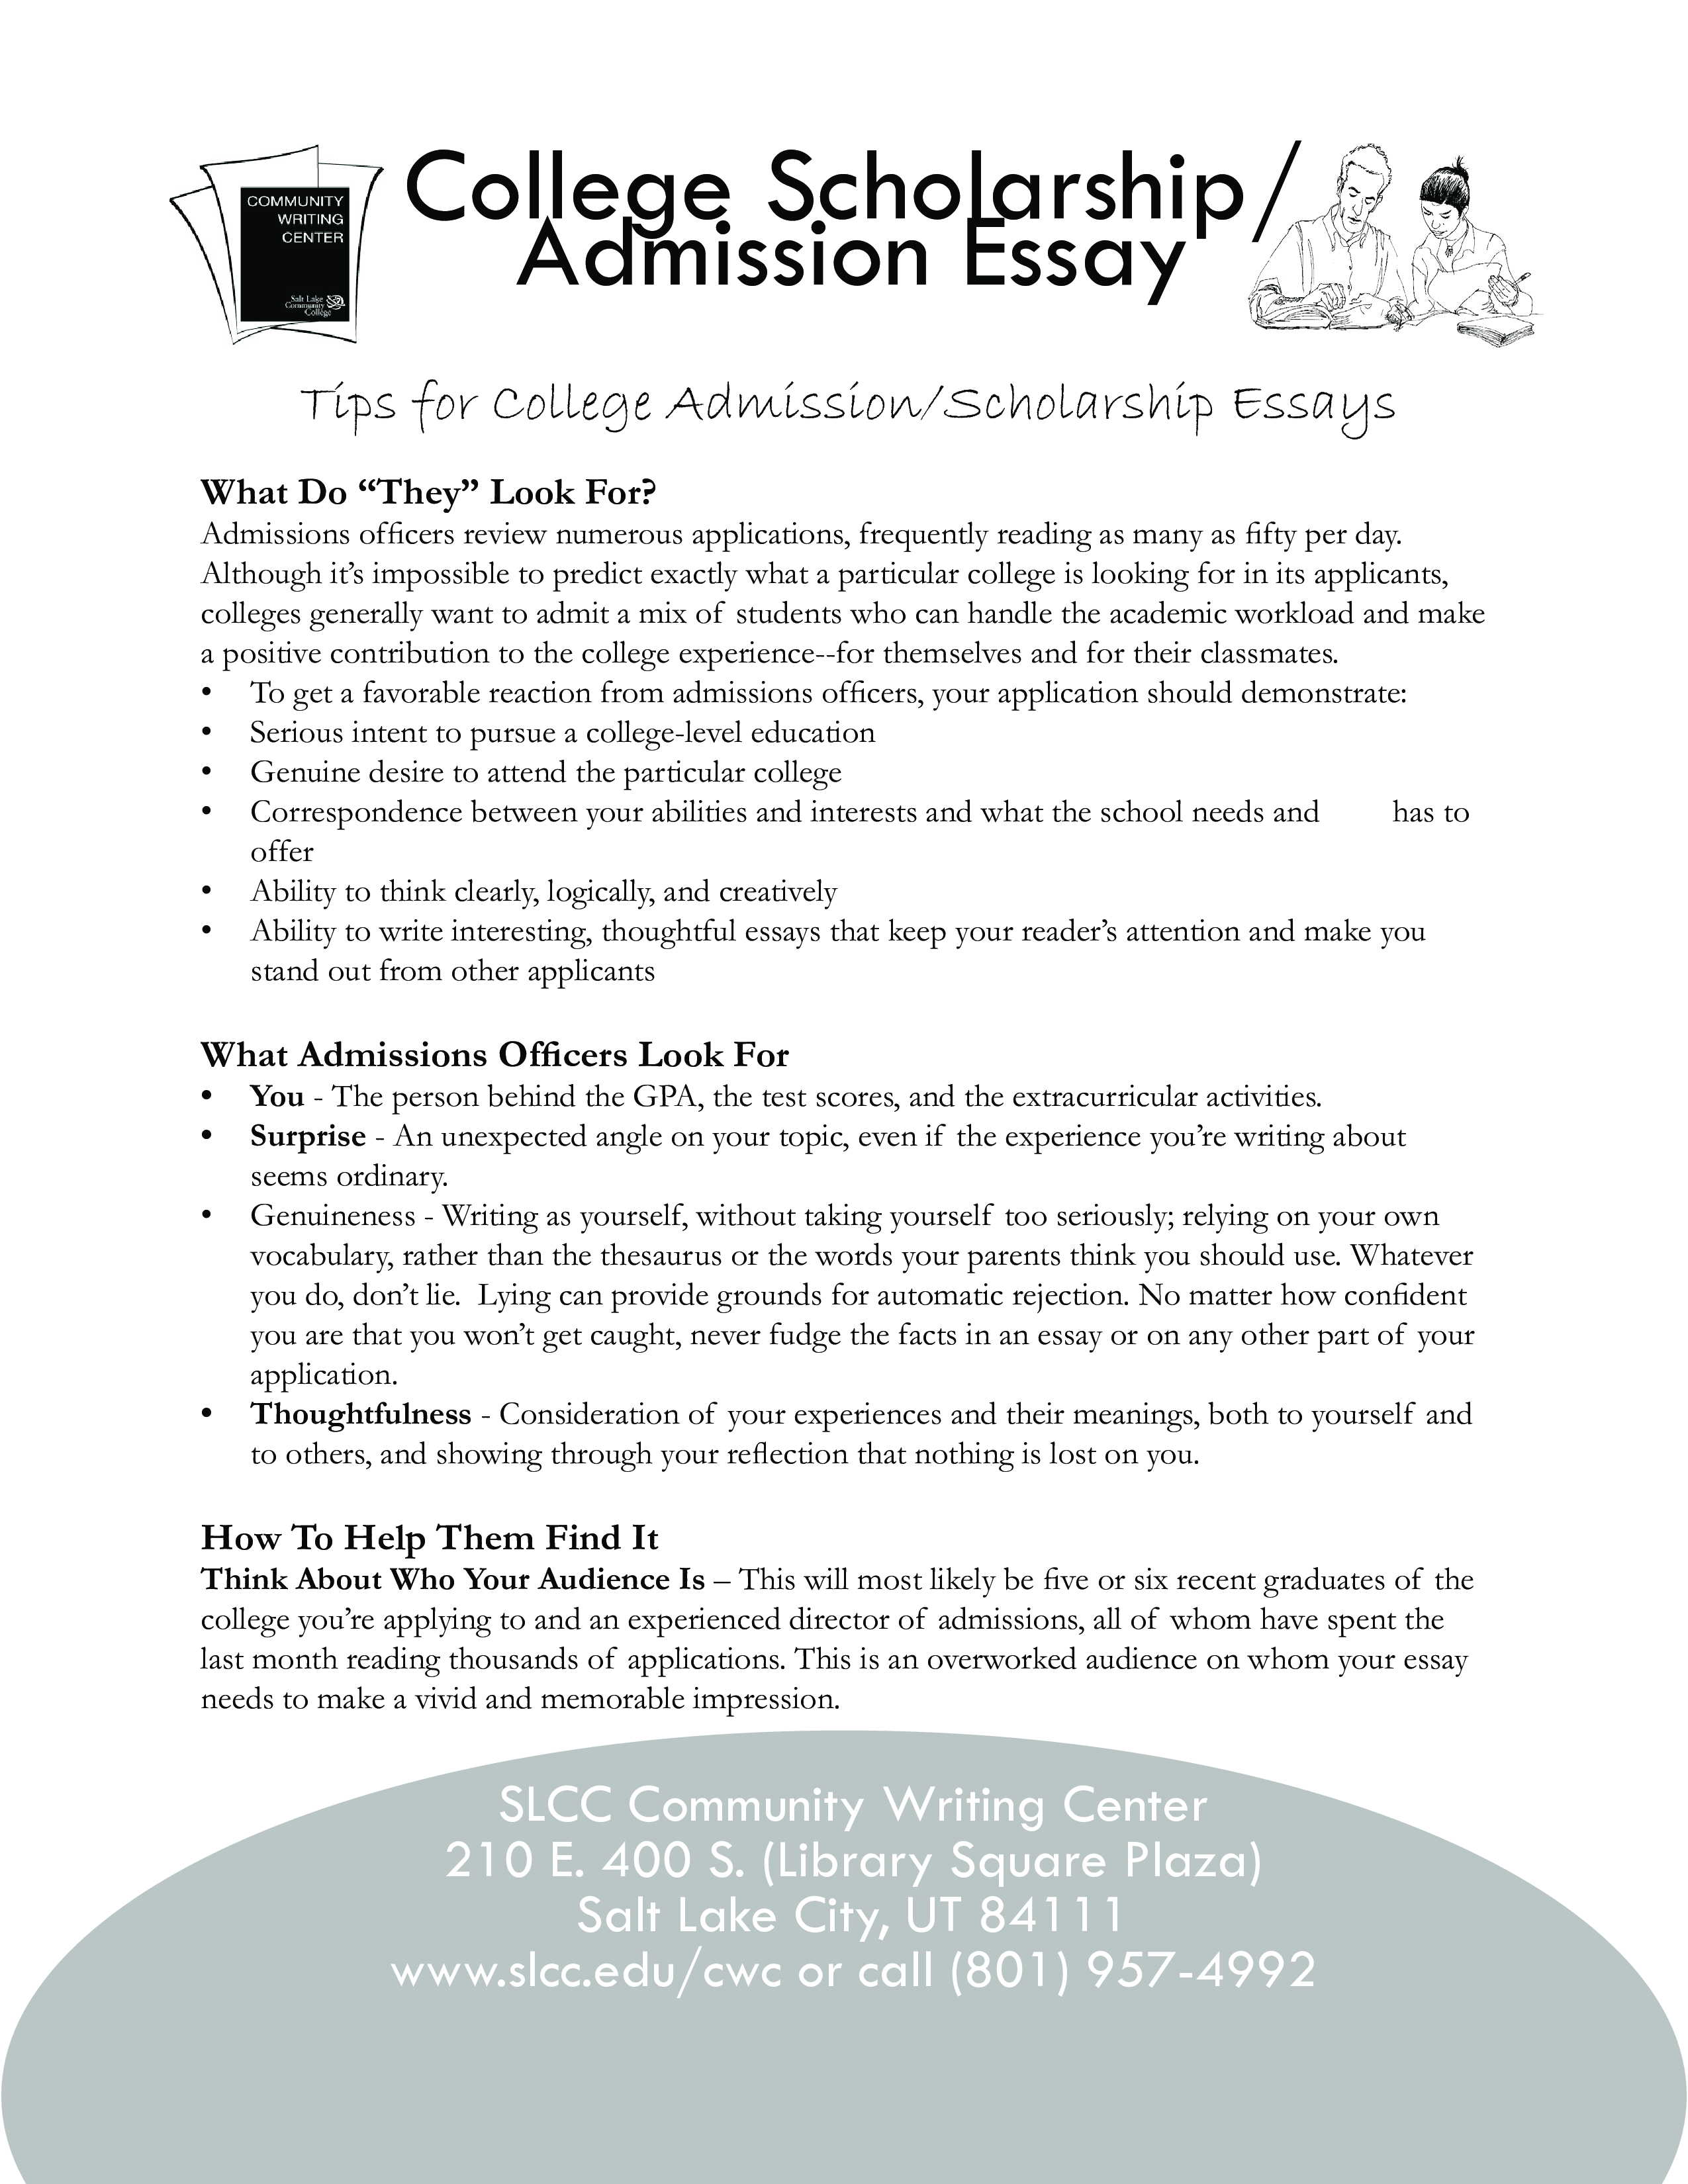 Application essay writing for college